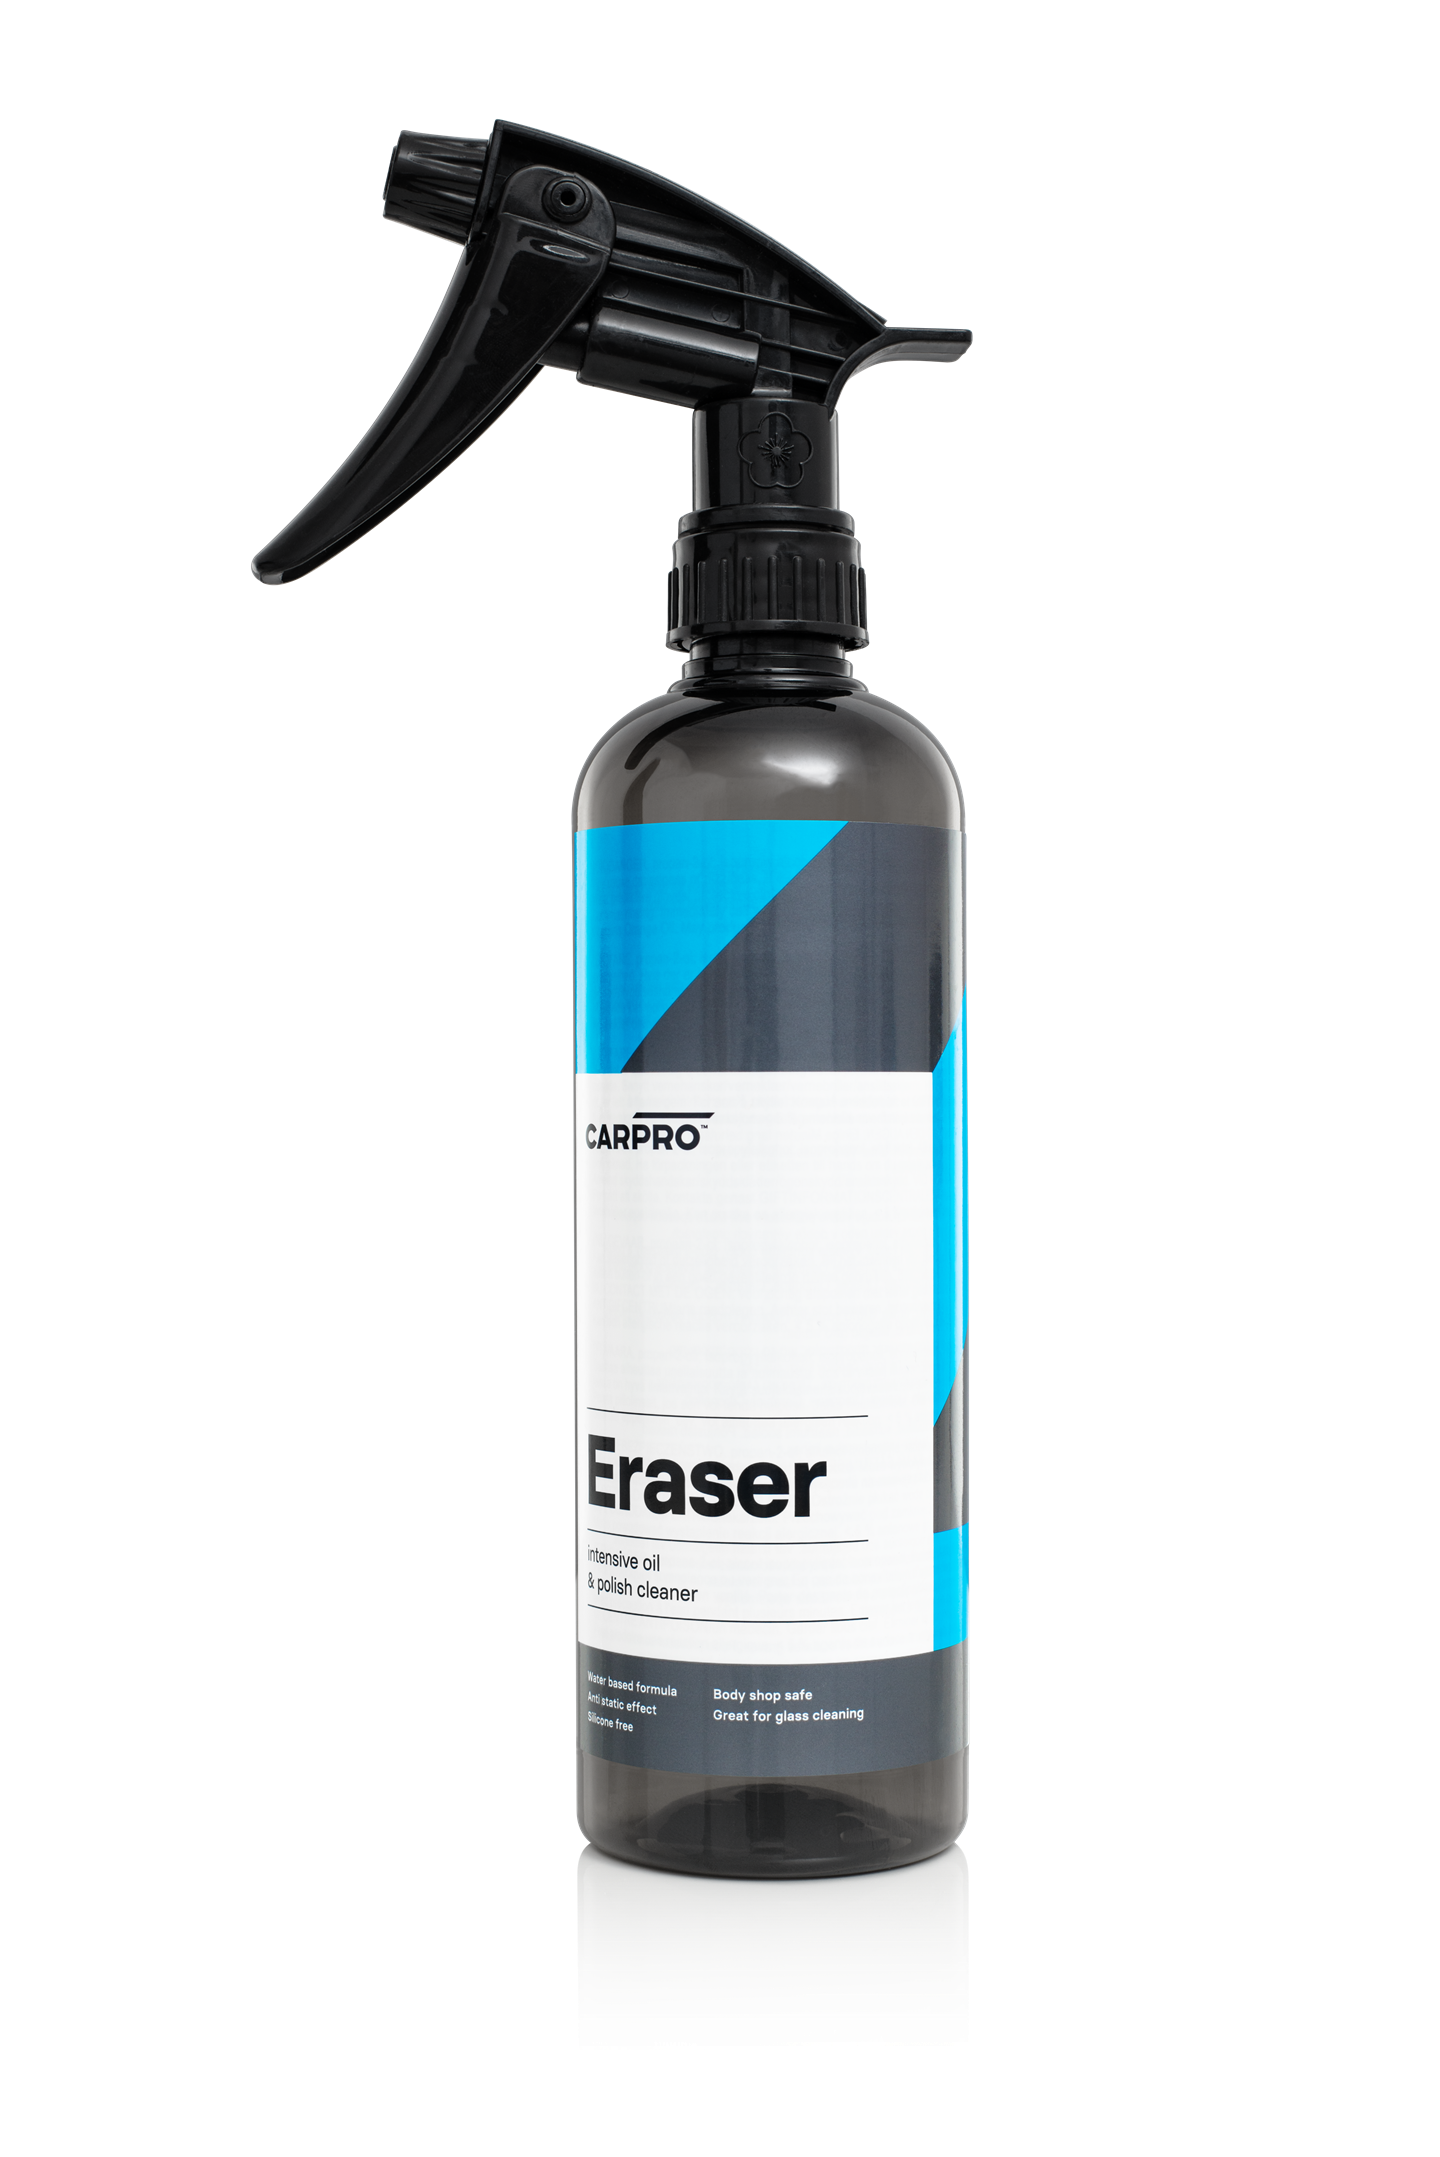 Silicone remover - Water-based degreaser